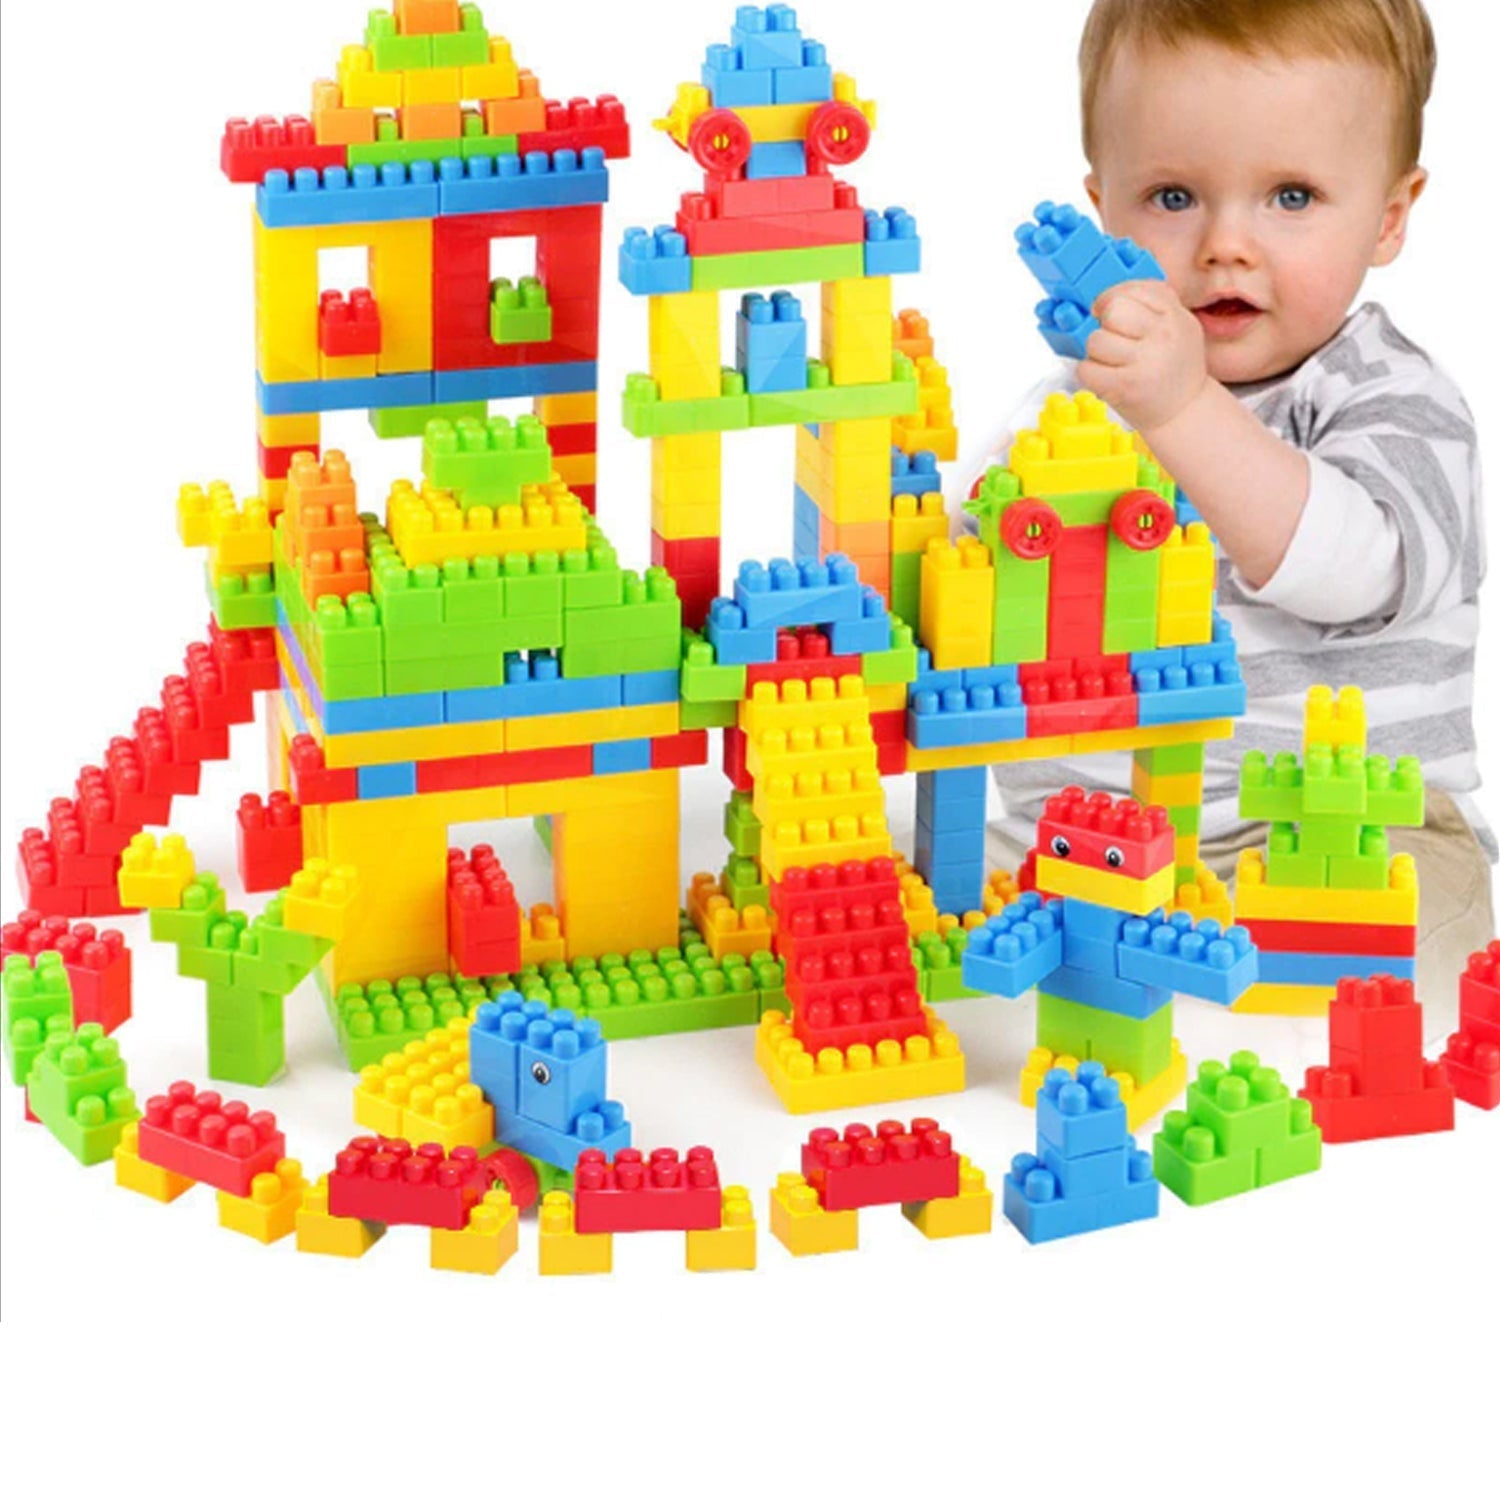 4627 A Building Blocks 60 Pc widely used by kids and children for playing and entertaining purposes among all kinds of household and official places etc. 